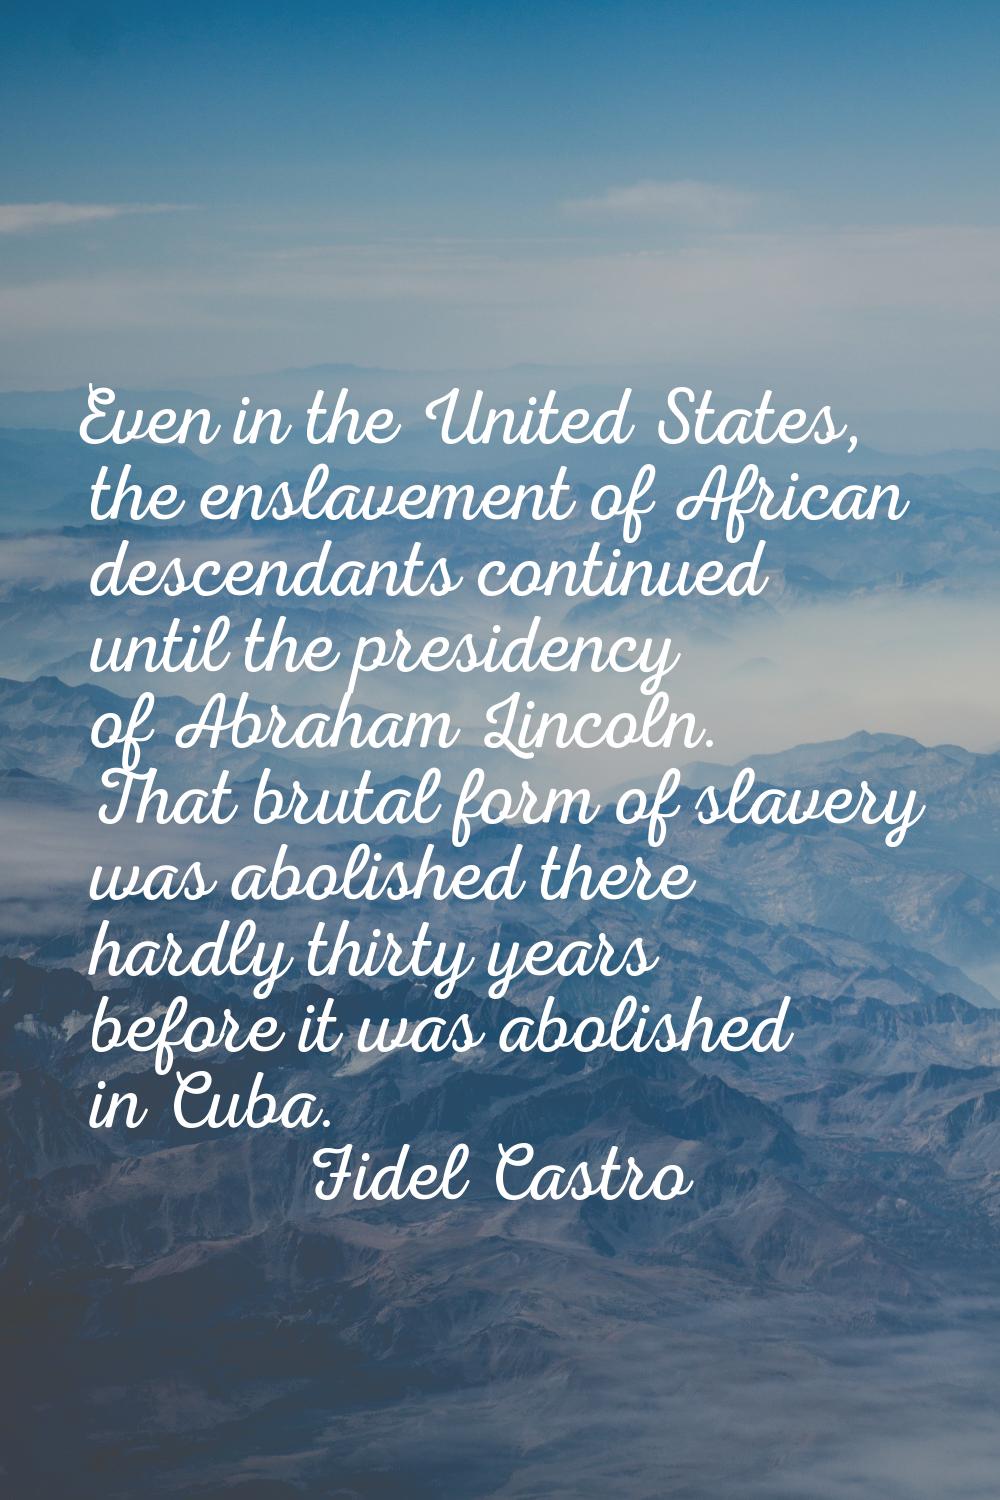 Even in the United States, the enslavement of African descendants continued until the presidency of